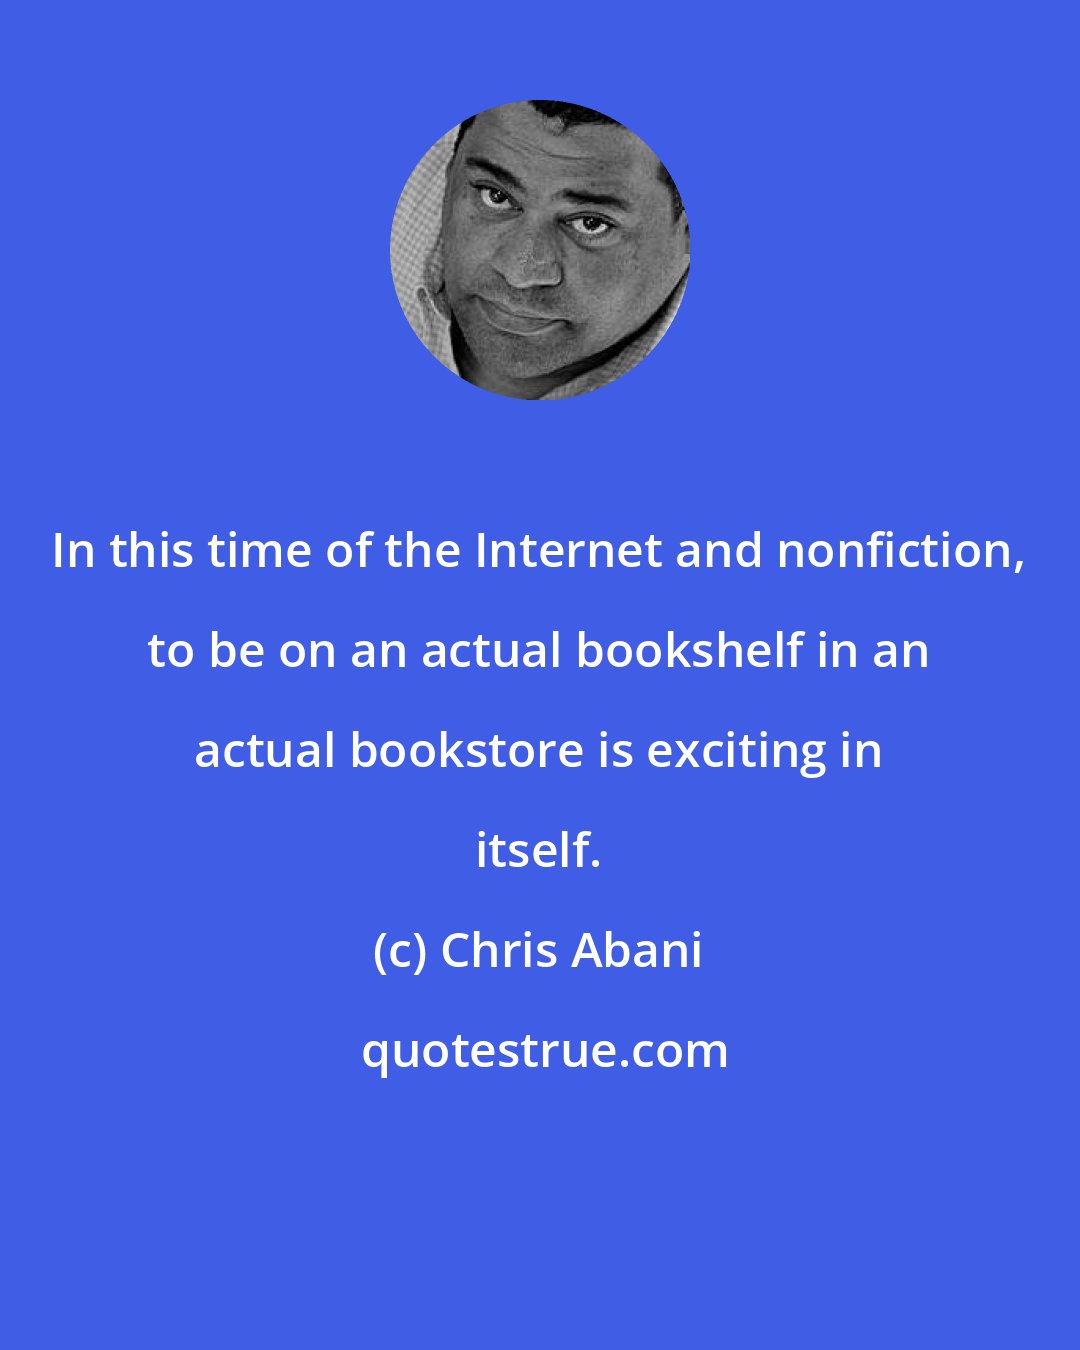 Chris Abani: In this time of the Internet and nonfiction, to be on an actual bookshelf in an actual bookstore is exciting in itself.